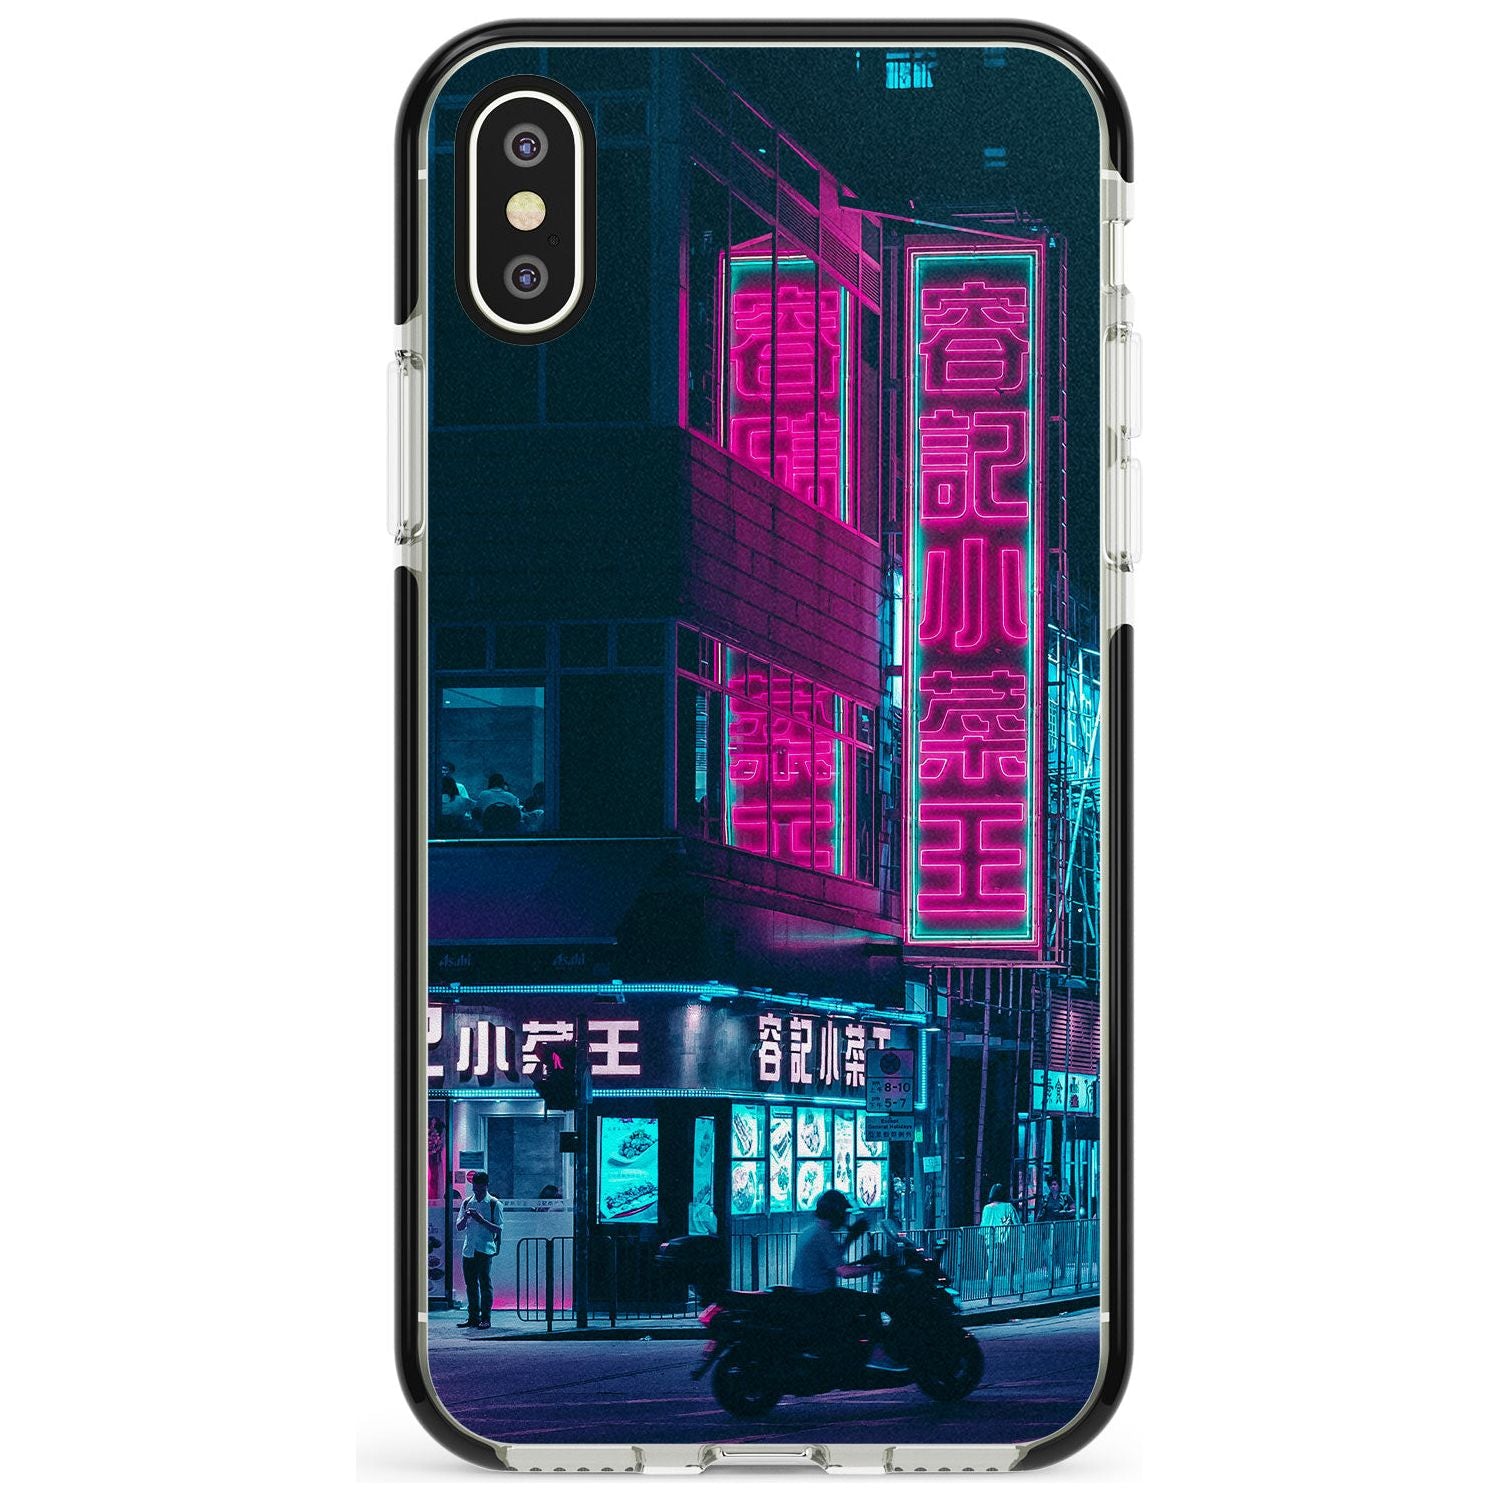 Motorcylist & Signs - Neon Cities Photographs Black Impact Phone Case for iPhone X XS Max XR